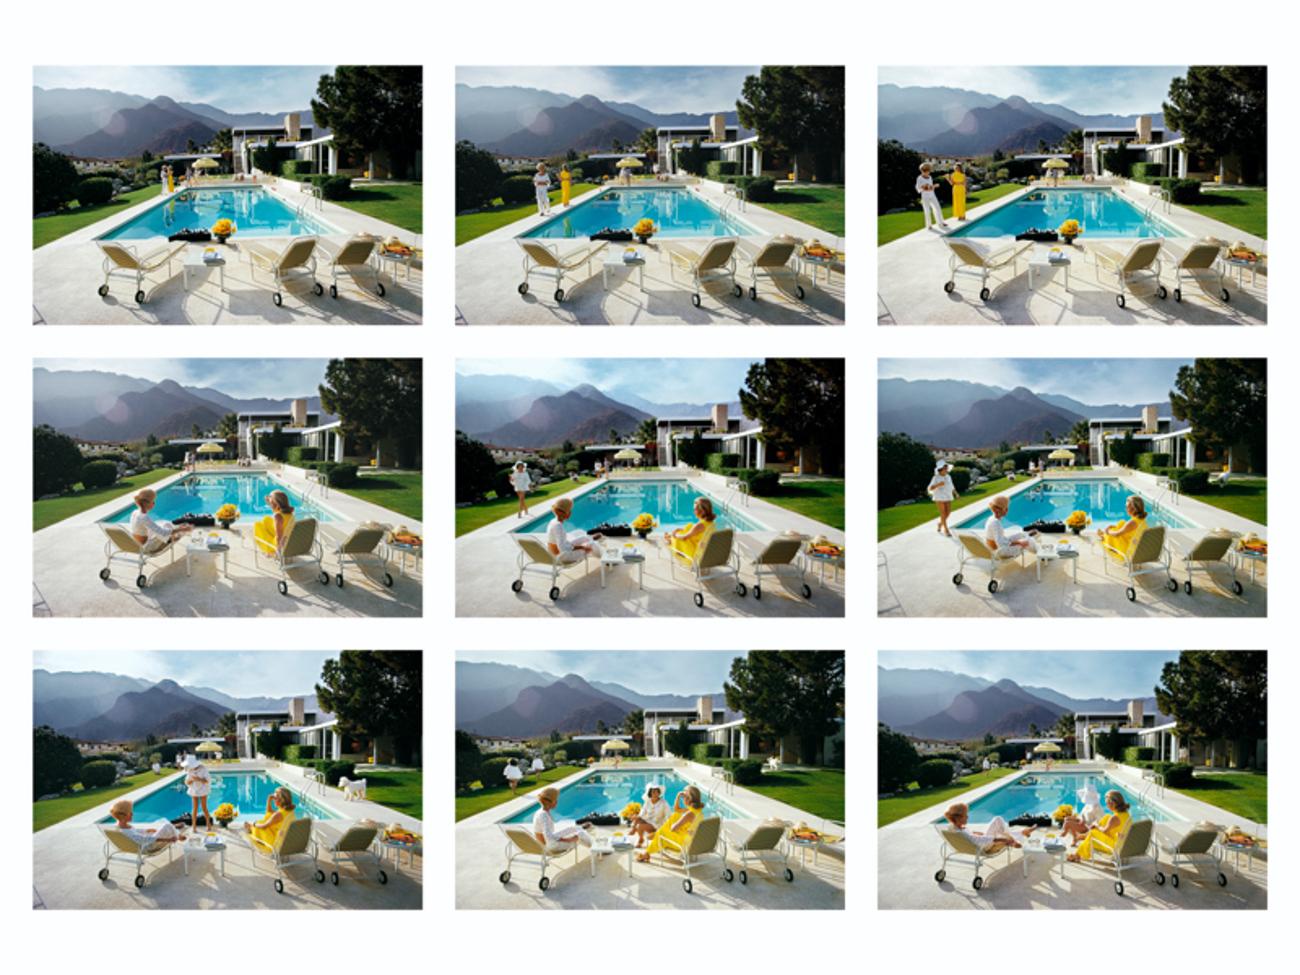 A Poolside Story 
1970
by Slim Aarons

Slim Aarons Limited Estate Edition

Composite contact sheet of the Kaufmann House in Palm Springs 1970.

unframed
c type print
printed 2023
20 x 24"  - paper size

Limited to 150 prints only – regardless of